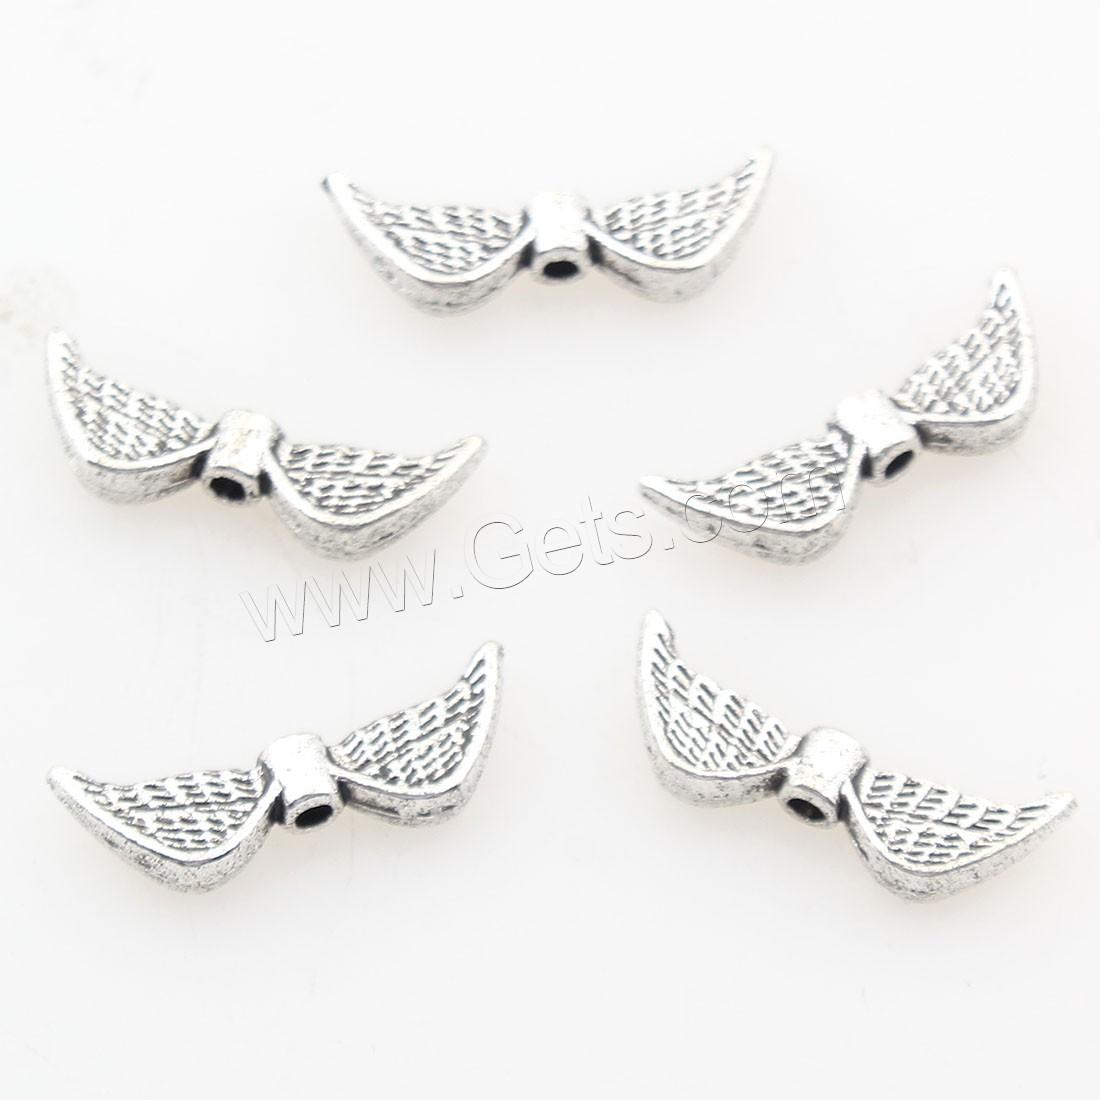 Zinc Alloy Jewelry Beads, antique silver color plated, more colors for choice, 21x7mm, Hole:Approx 1mm, Approx 450PCs/Bag, Sold By Bag